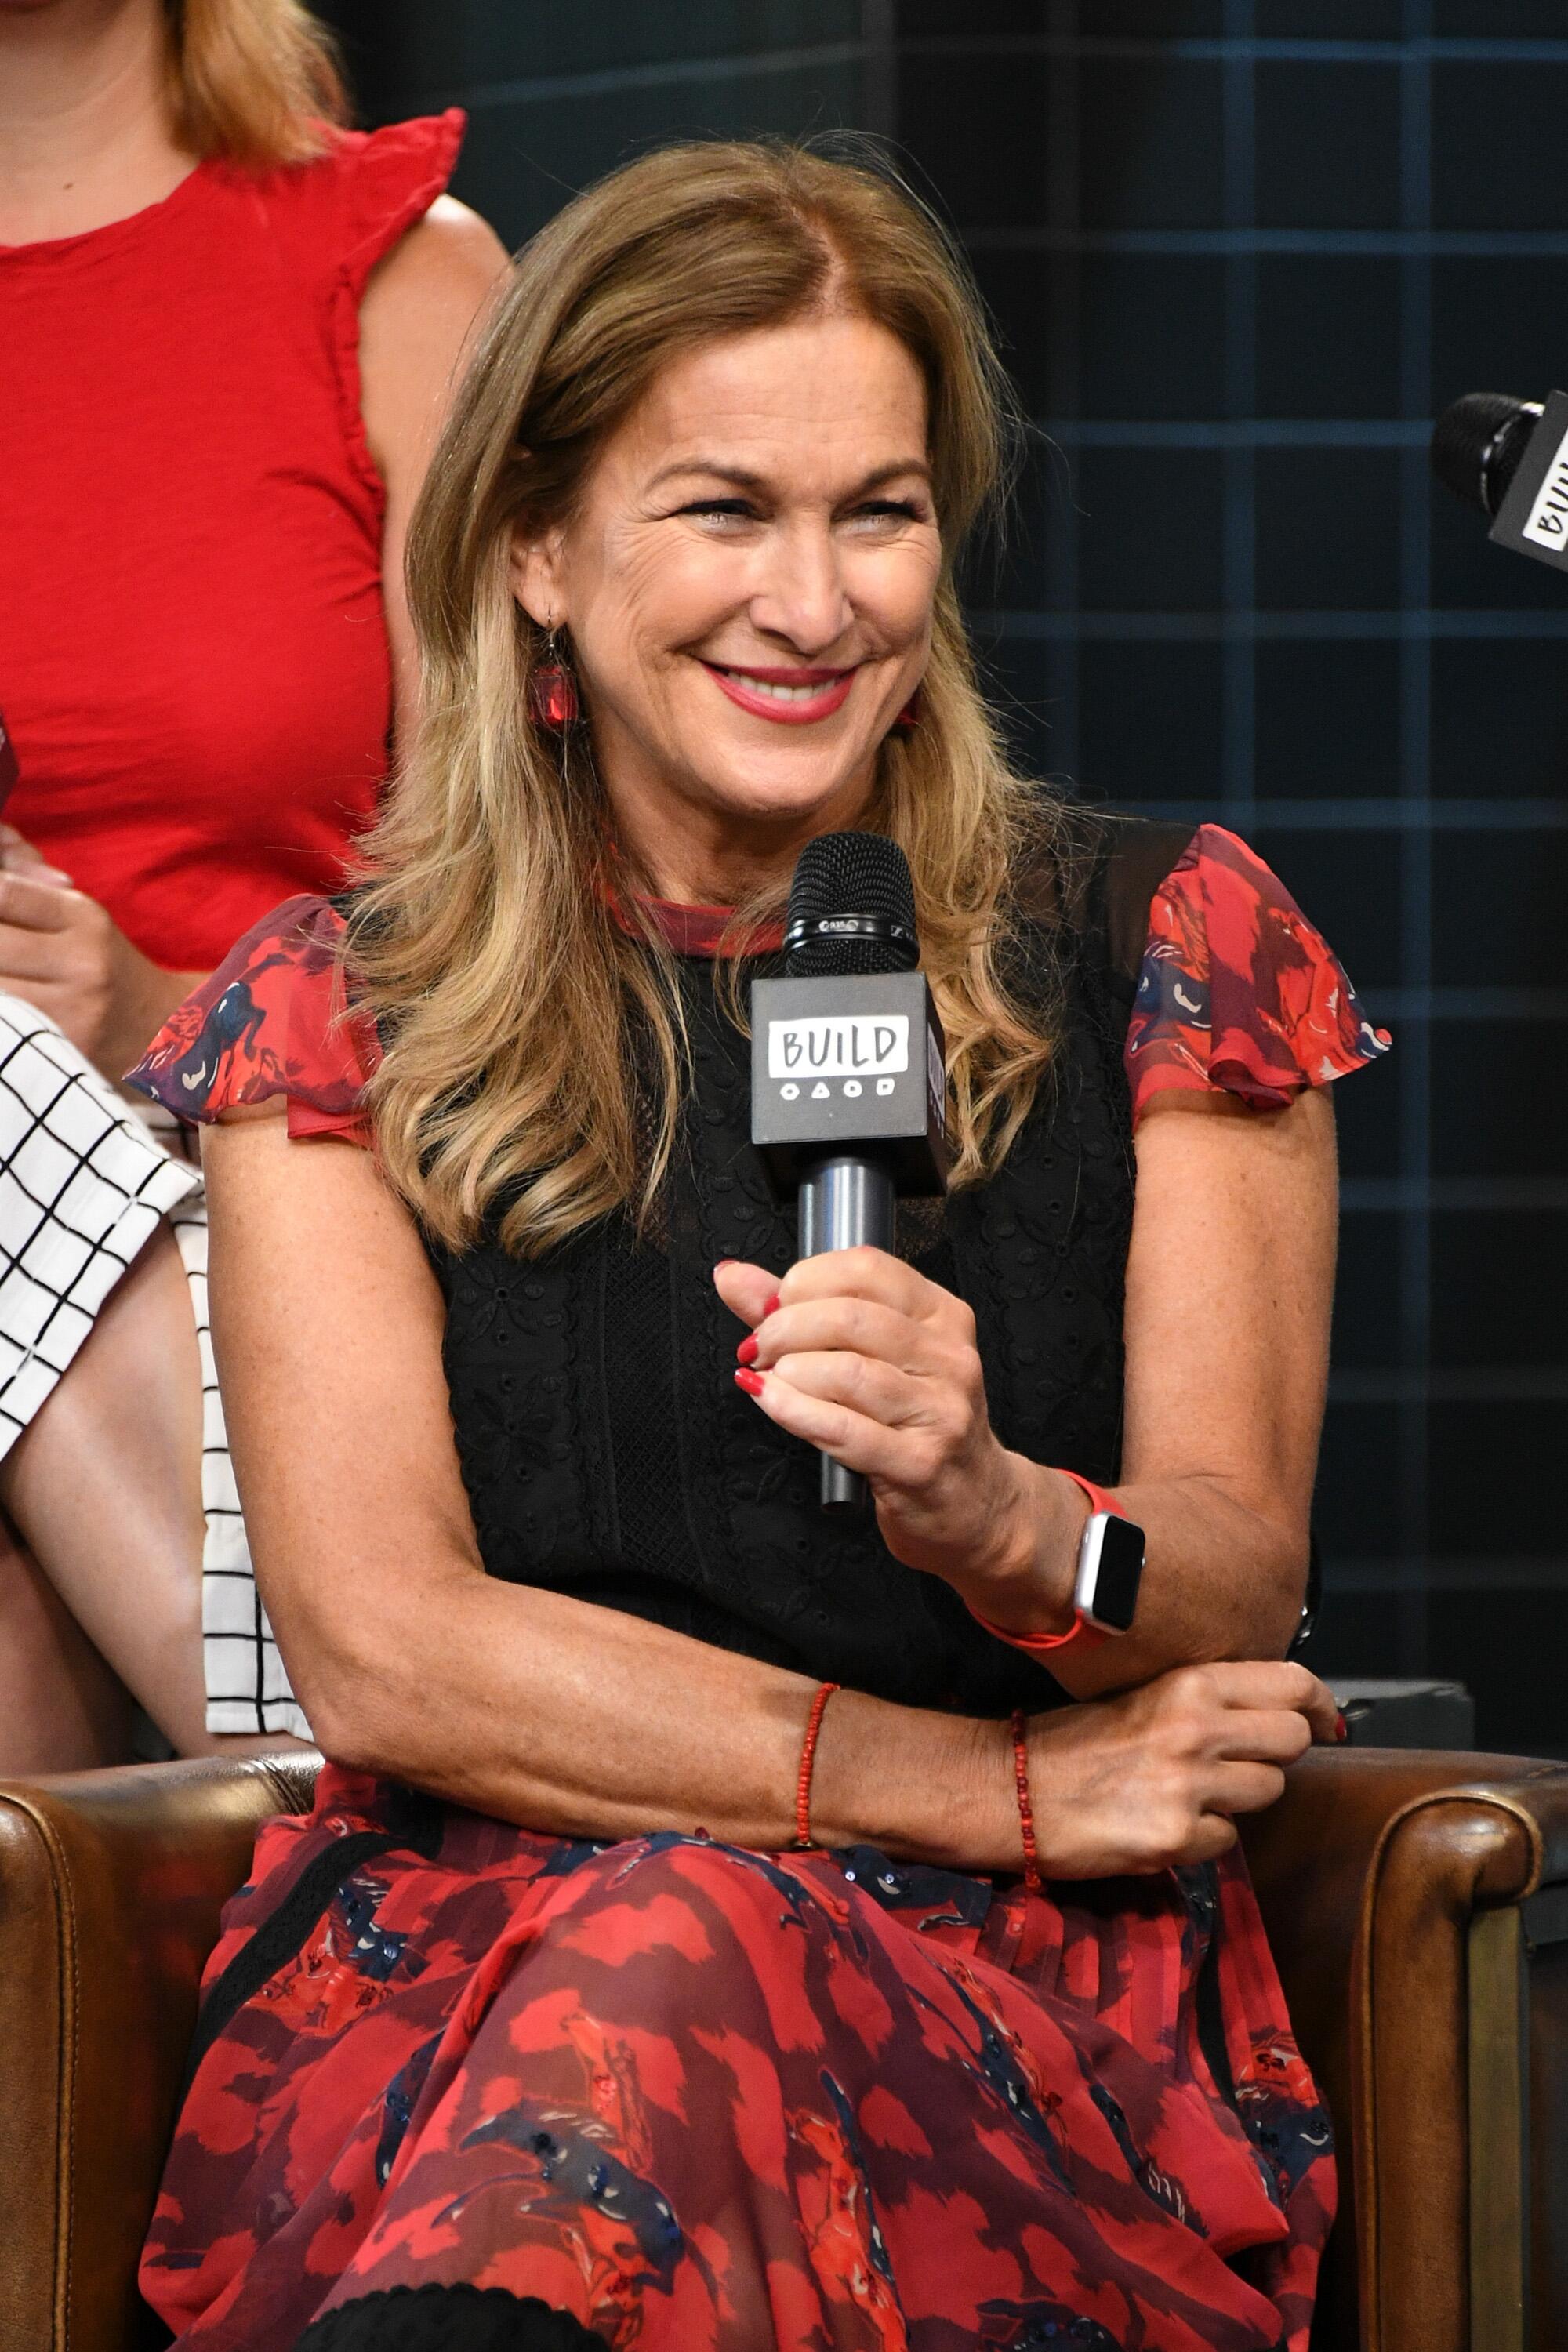 A woman in a red and black outfit, seated, smiling and holding a microphone